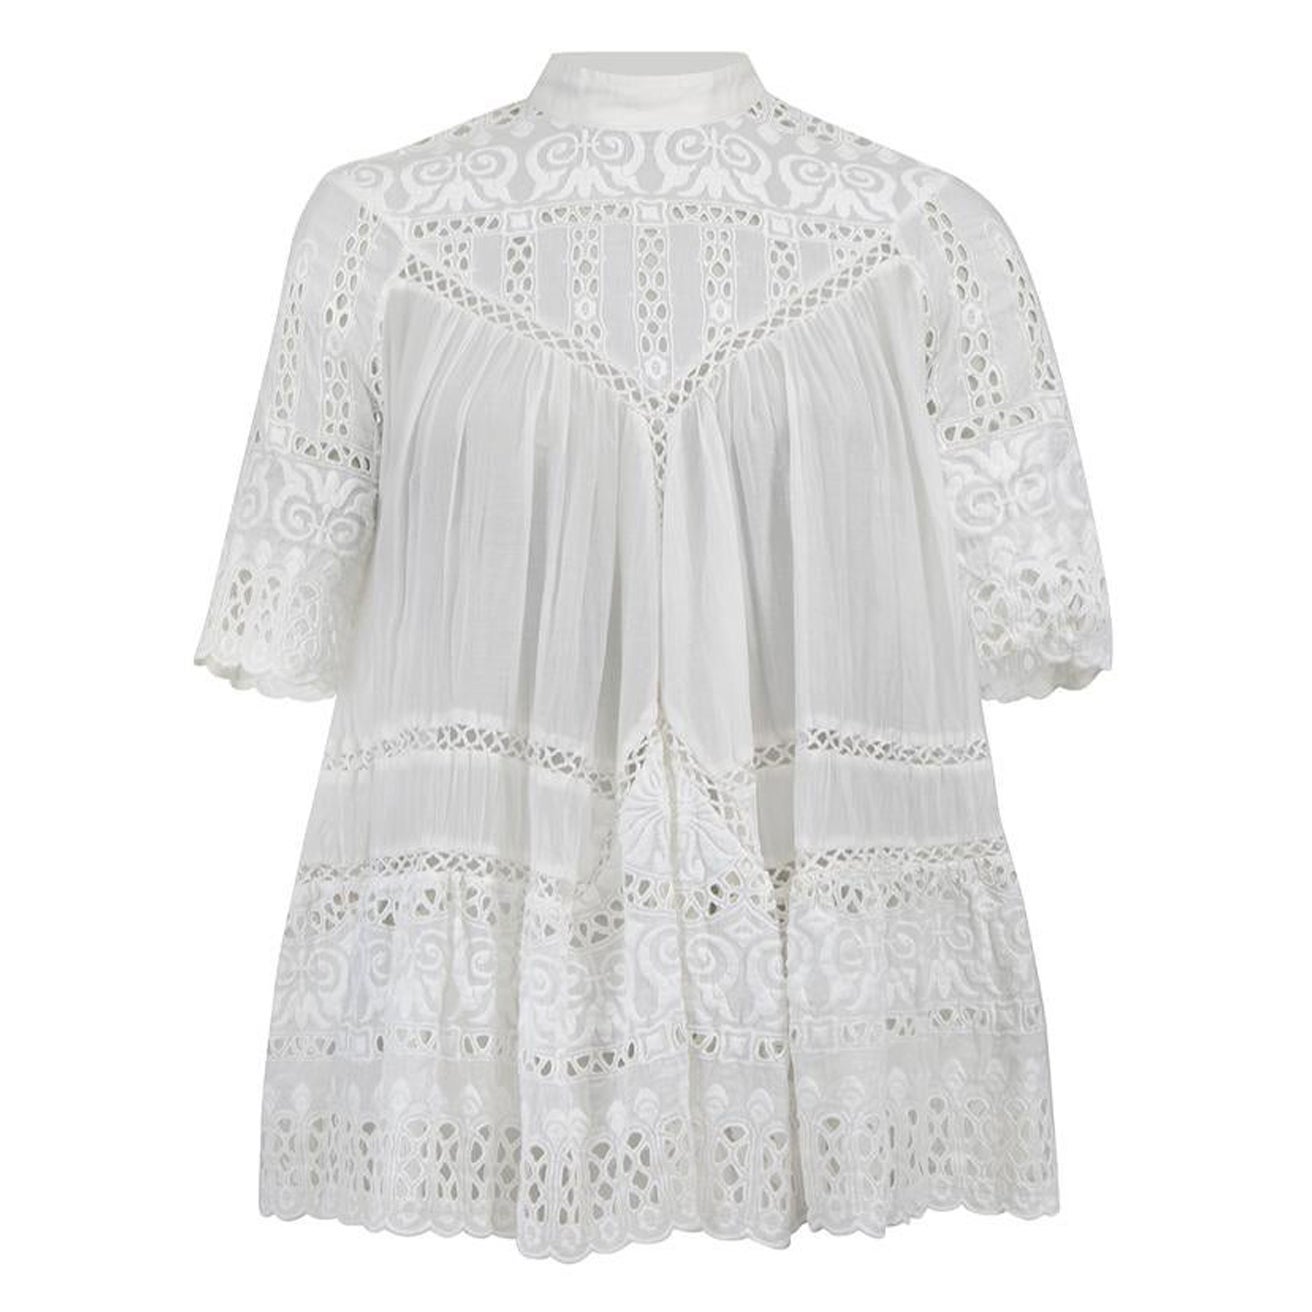 Zimmermann White Cotton Broderie Anglaise Lace Cut-Out Smock Top Size M For Sale